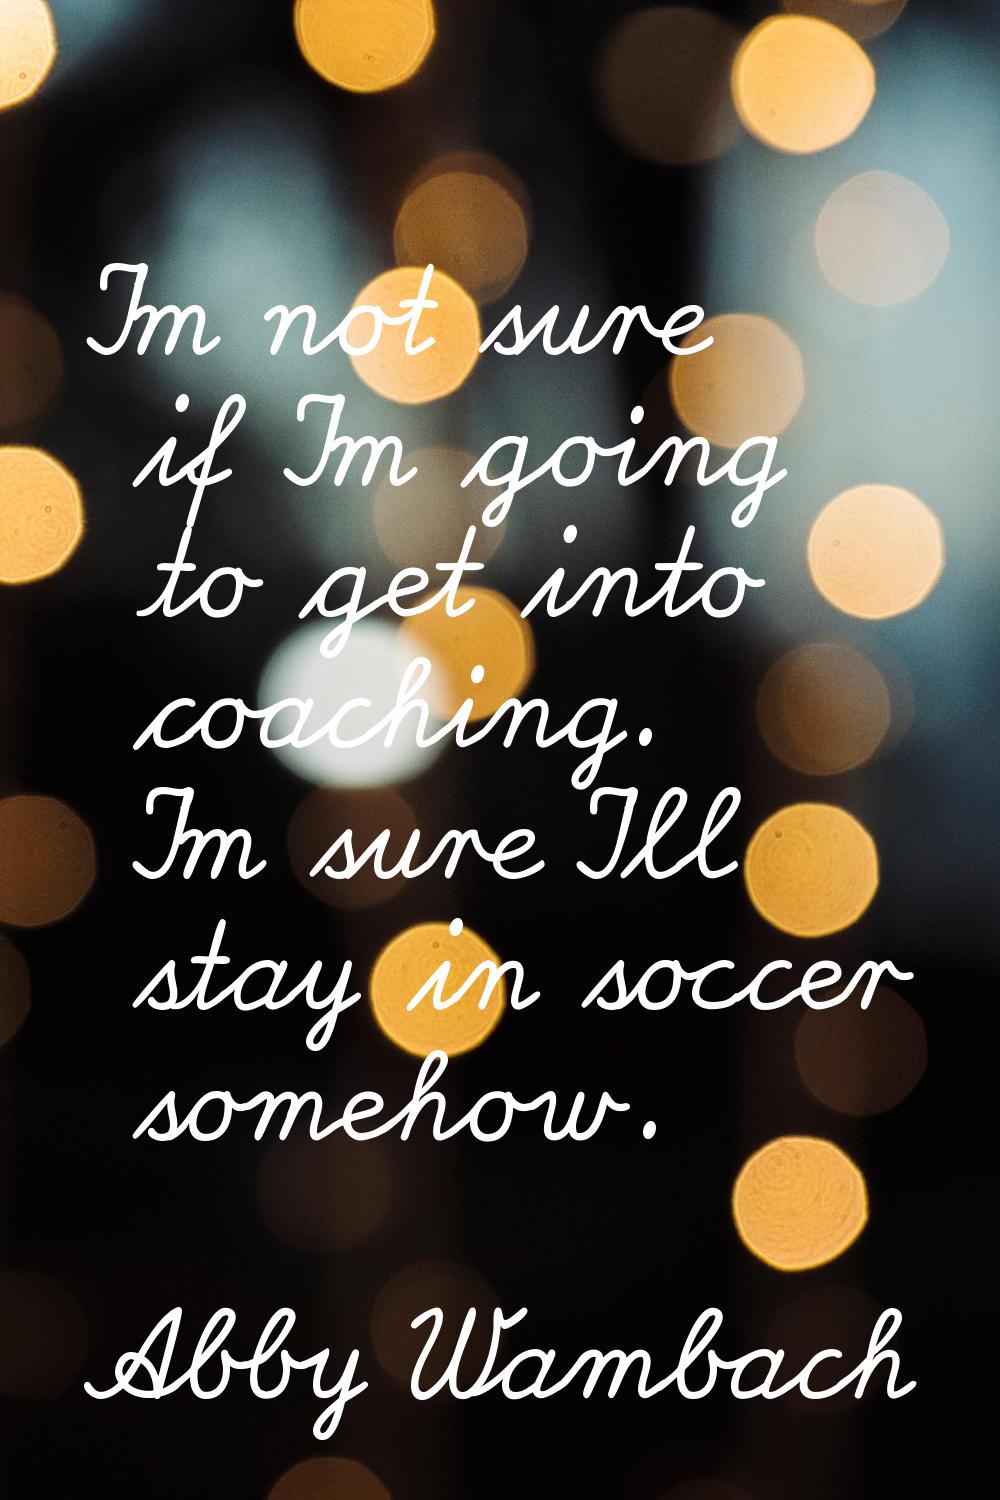 I'm not sure if I'm going to get into coaching. I'm sure I'll stay in soccer somehow.